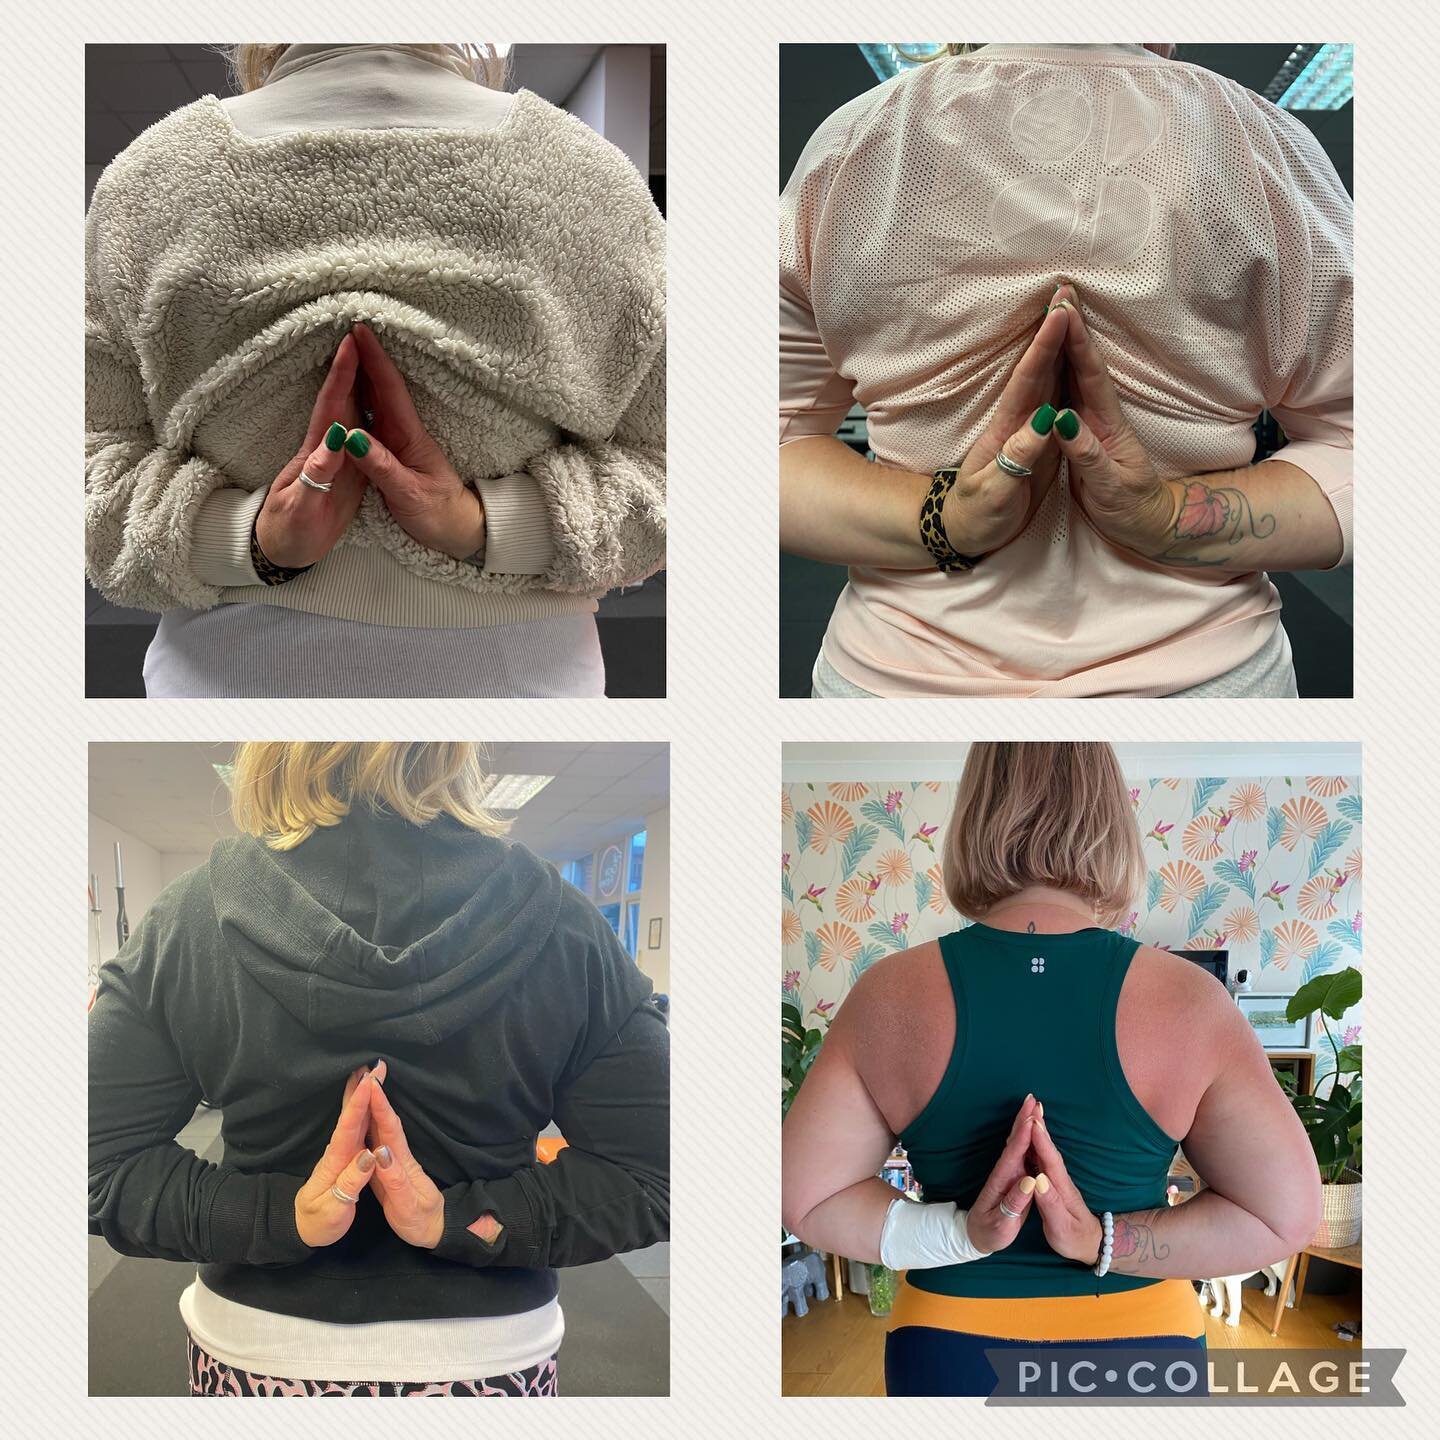 I&rsquo;ve been working with Sarah to help increase her mobility to supplement her yoga practise and help her find more depth/progressions in her asanas.
.
Blending a mixture of stretches, strength exercises and drills focusing on shoulder range and 